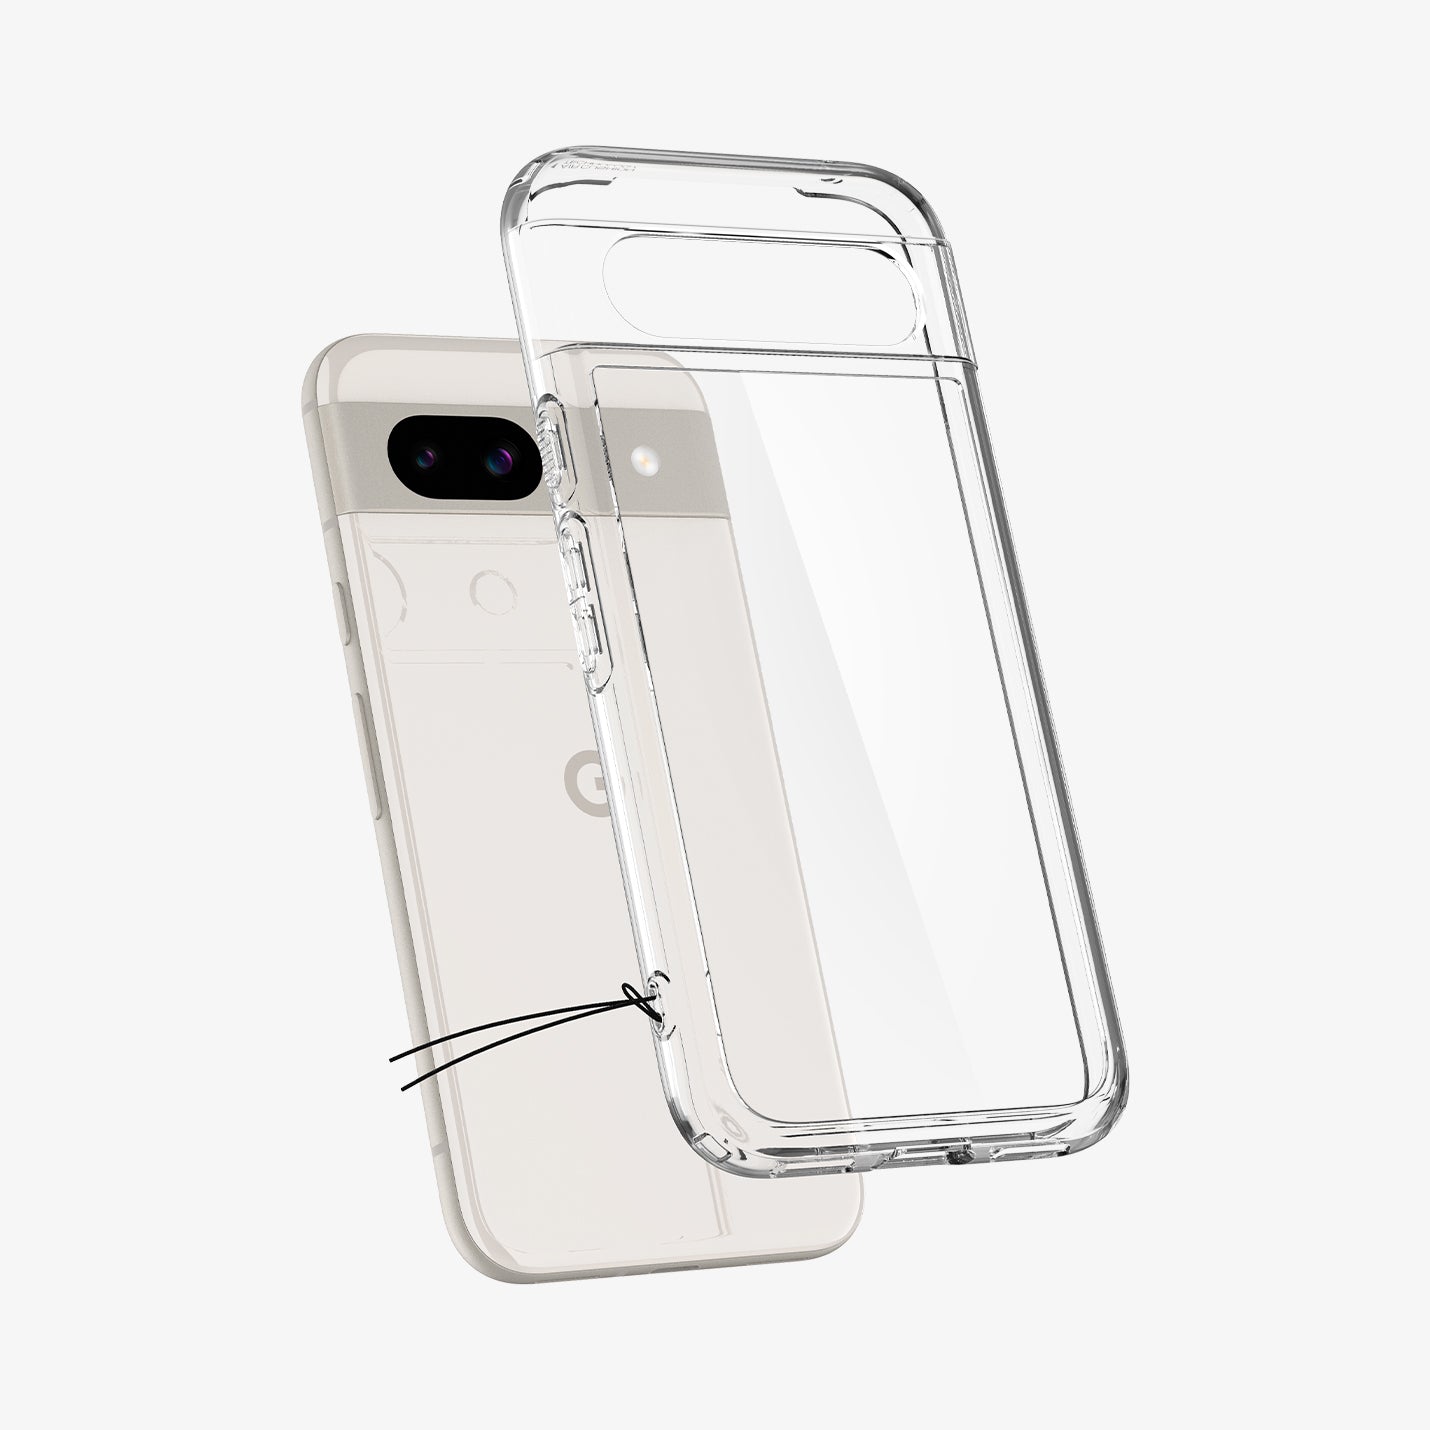 ACS07260 - Pixel 8a Case Ultra Hybrid in Crystal Clear showing the back of clear tpu case hovering in front of the device